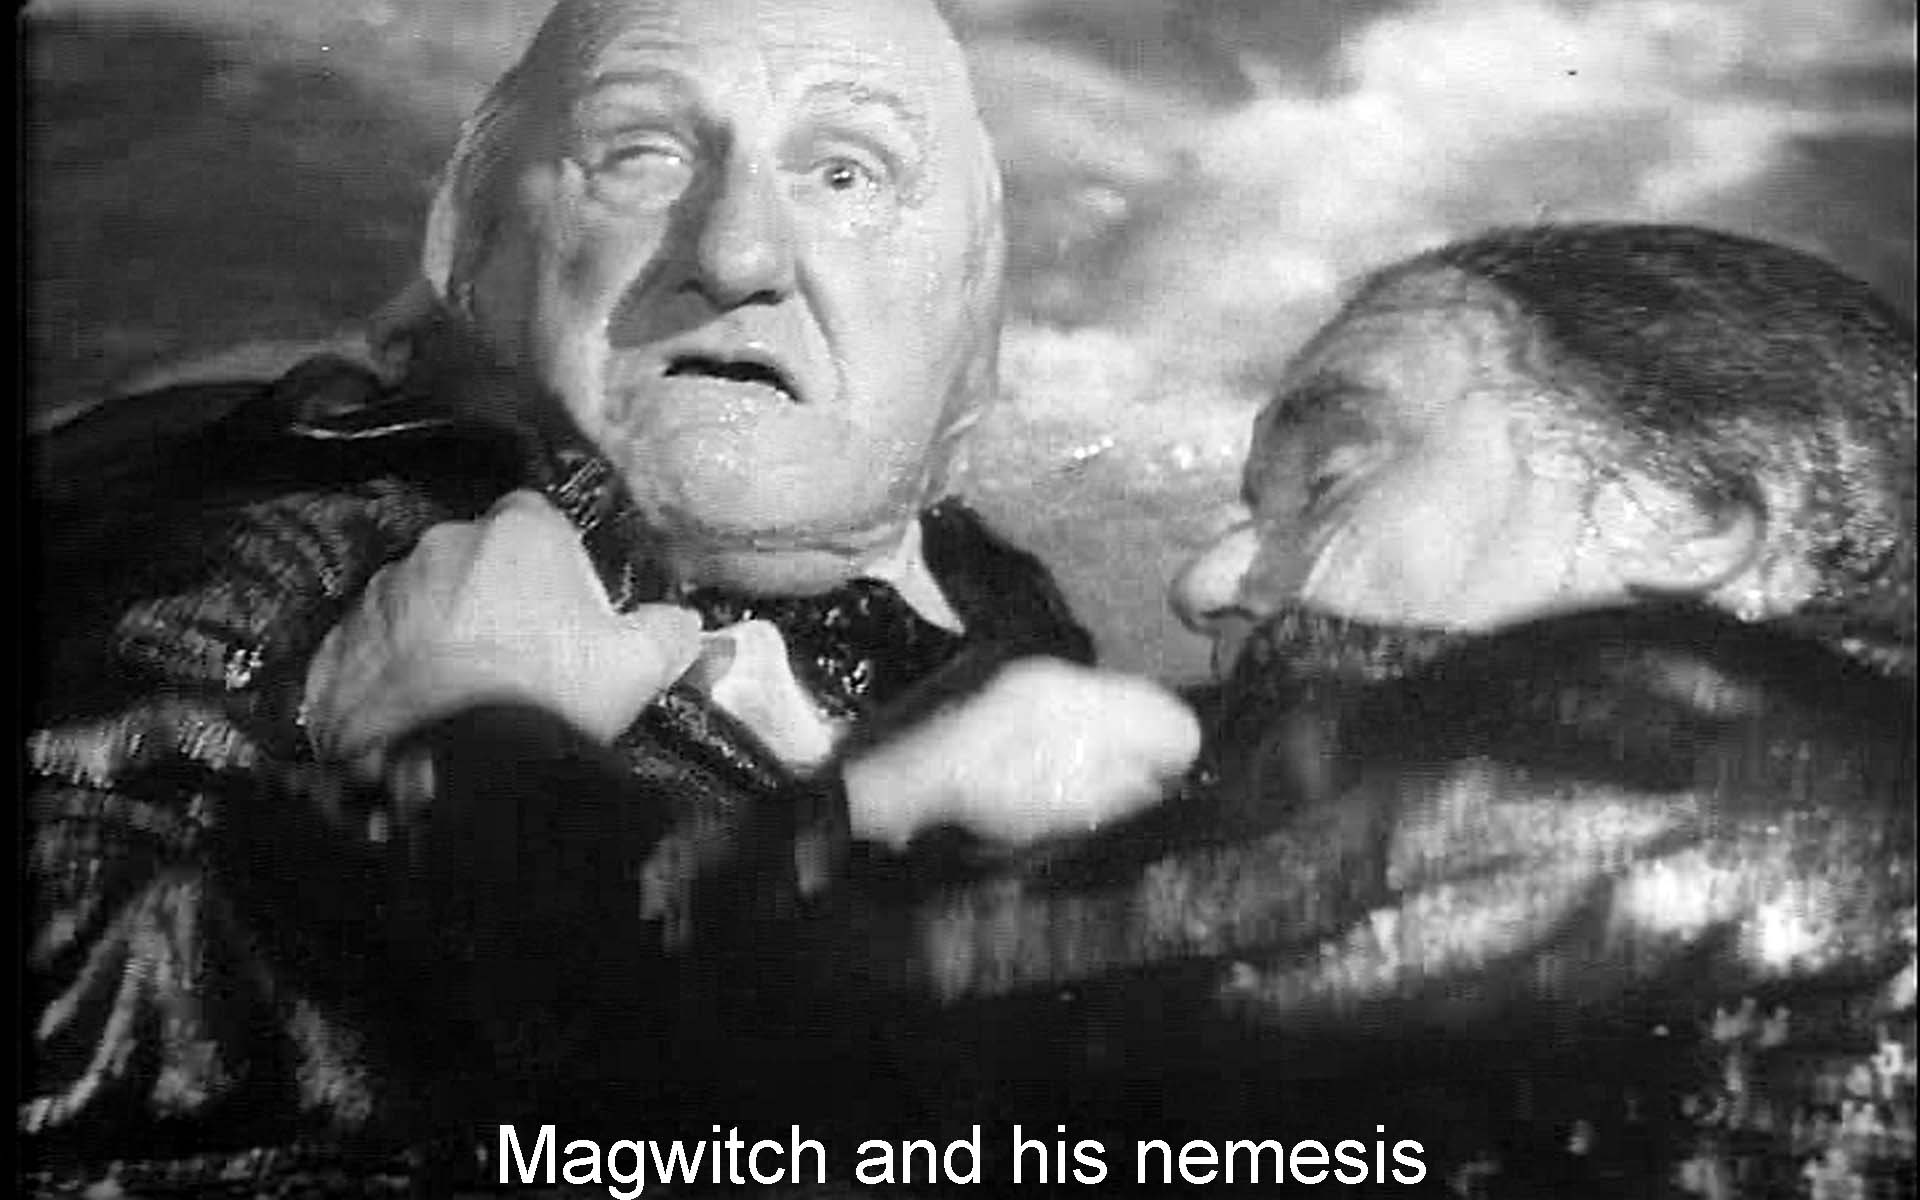 Magwitch and his nemesis